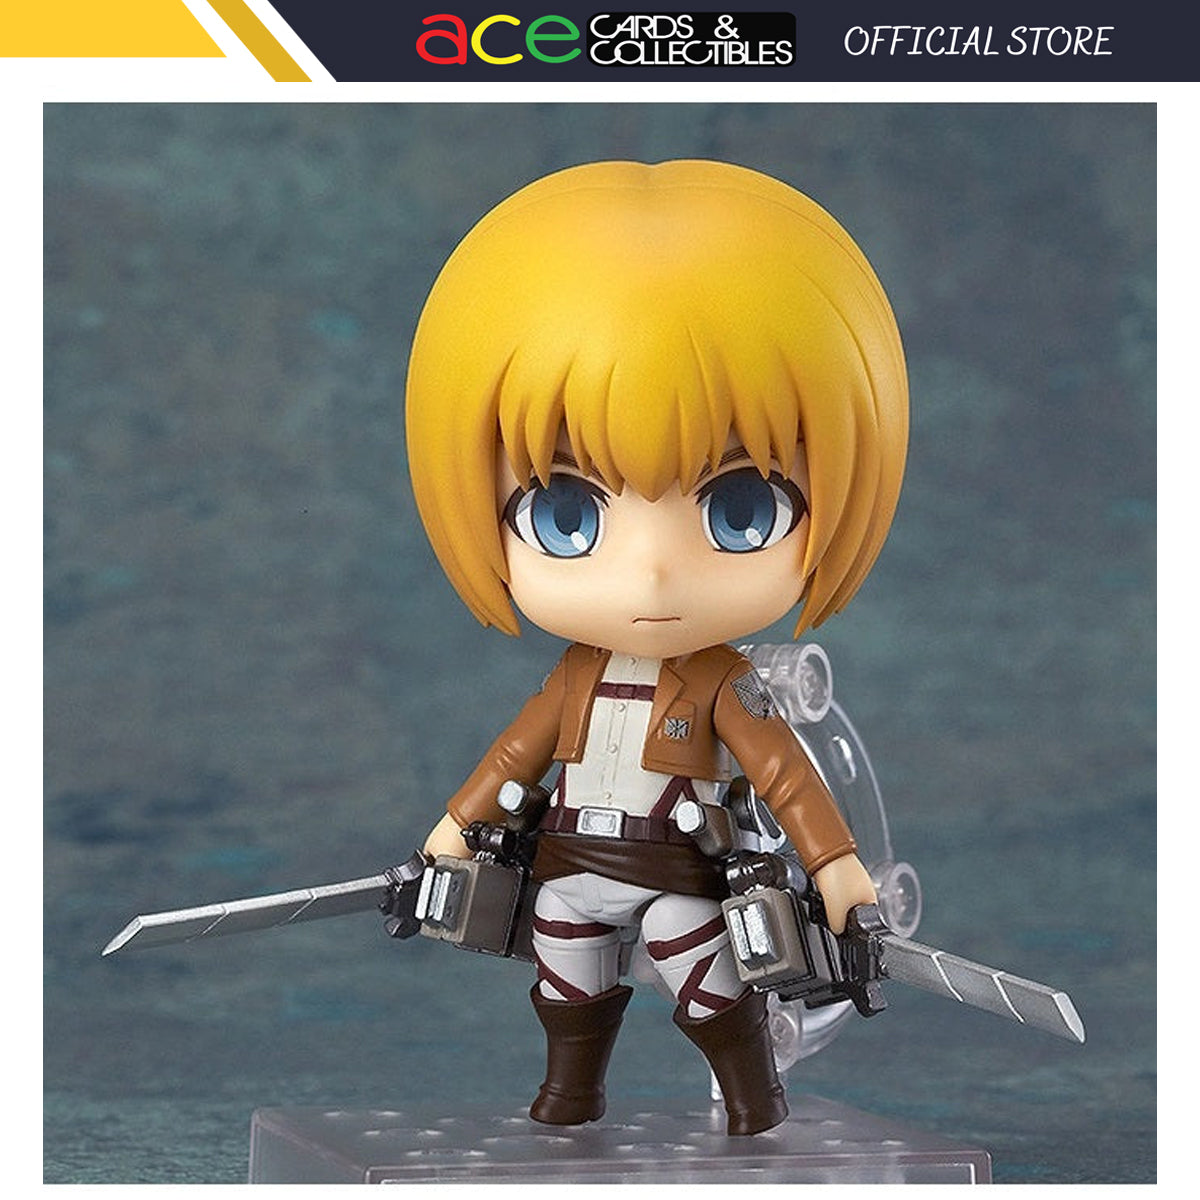 Attack on Titan Nendoroid [435] &quot;Armin&quot; Arlert (3rd - run)-Good Smile Company-Ace Cards &amp; Collectibles